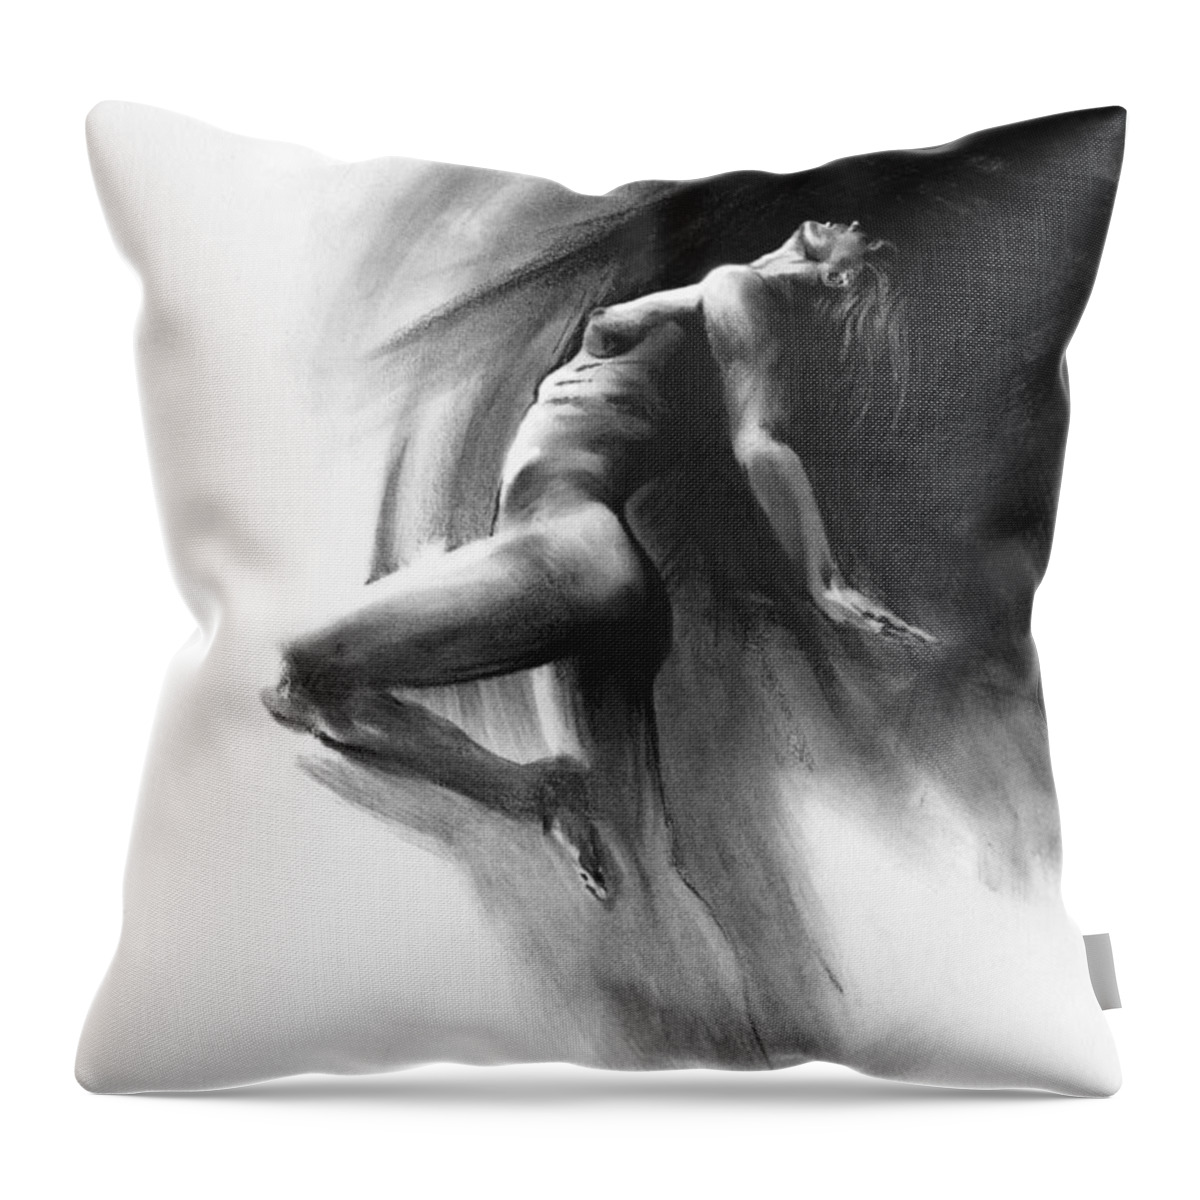 Figurative Throw Pillow featuring the drawing Fount by Paul Davenport